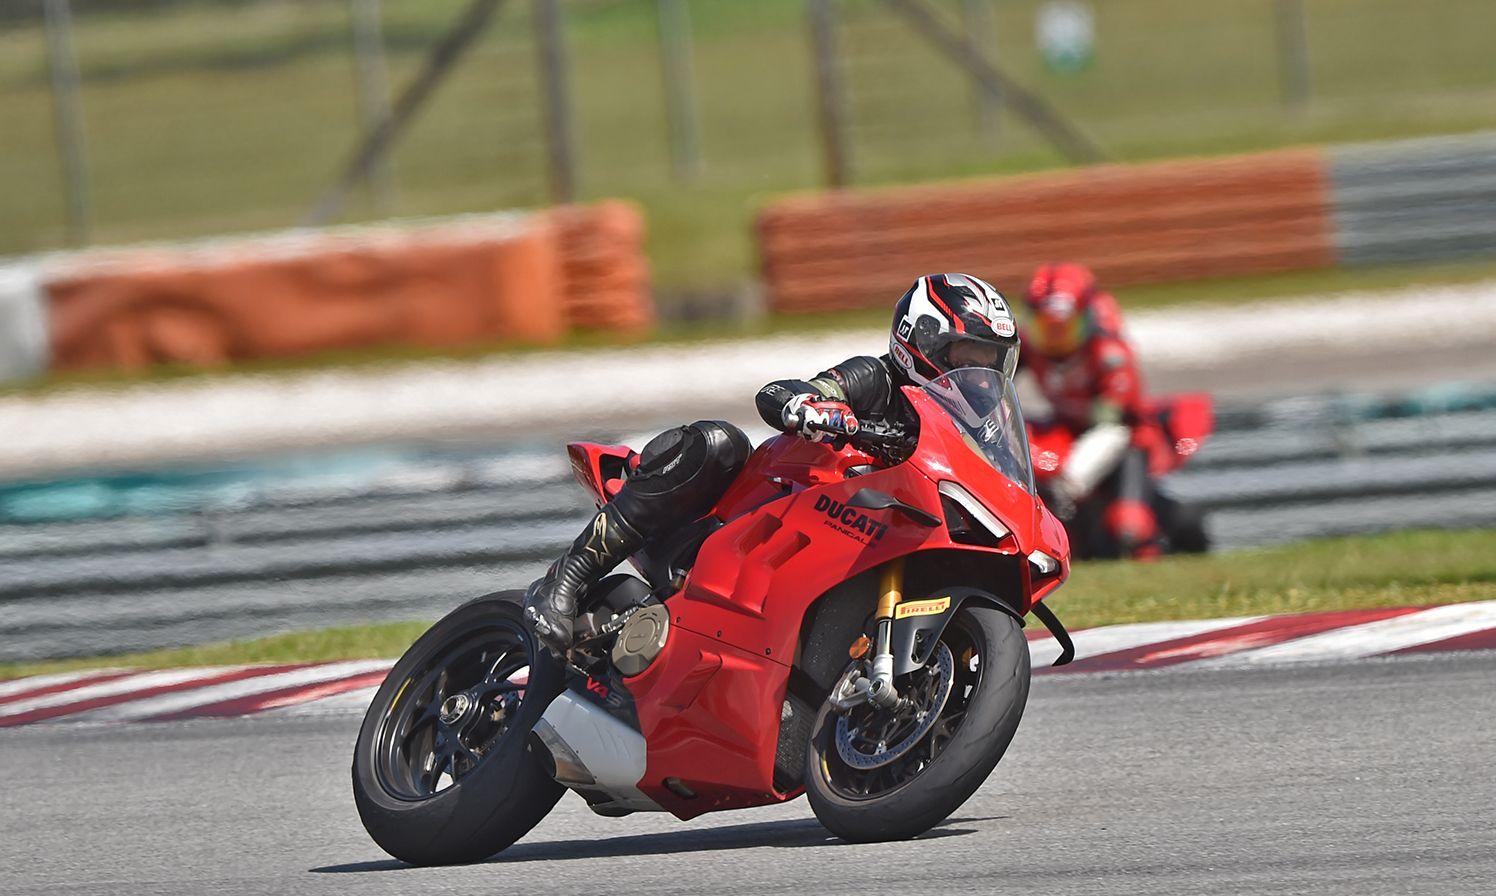 car&bike was invited to participate in the Ducati Riding Experience (DRE) Racetrack Academy at Sepang International Circuit. Here’s a look at how it went.